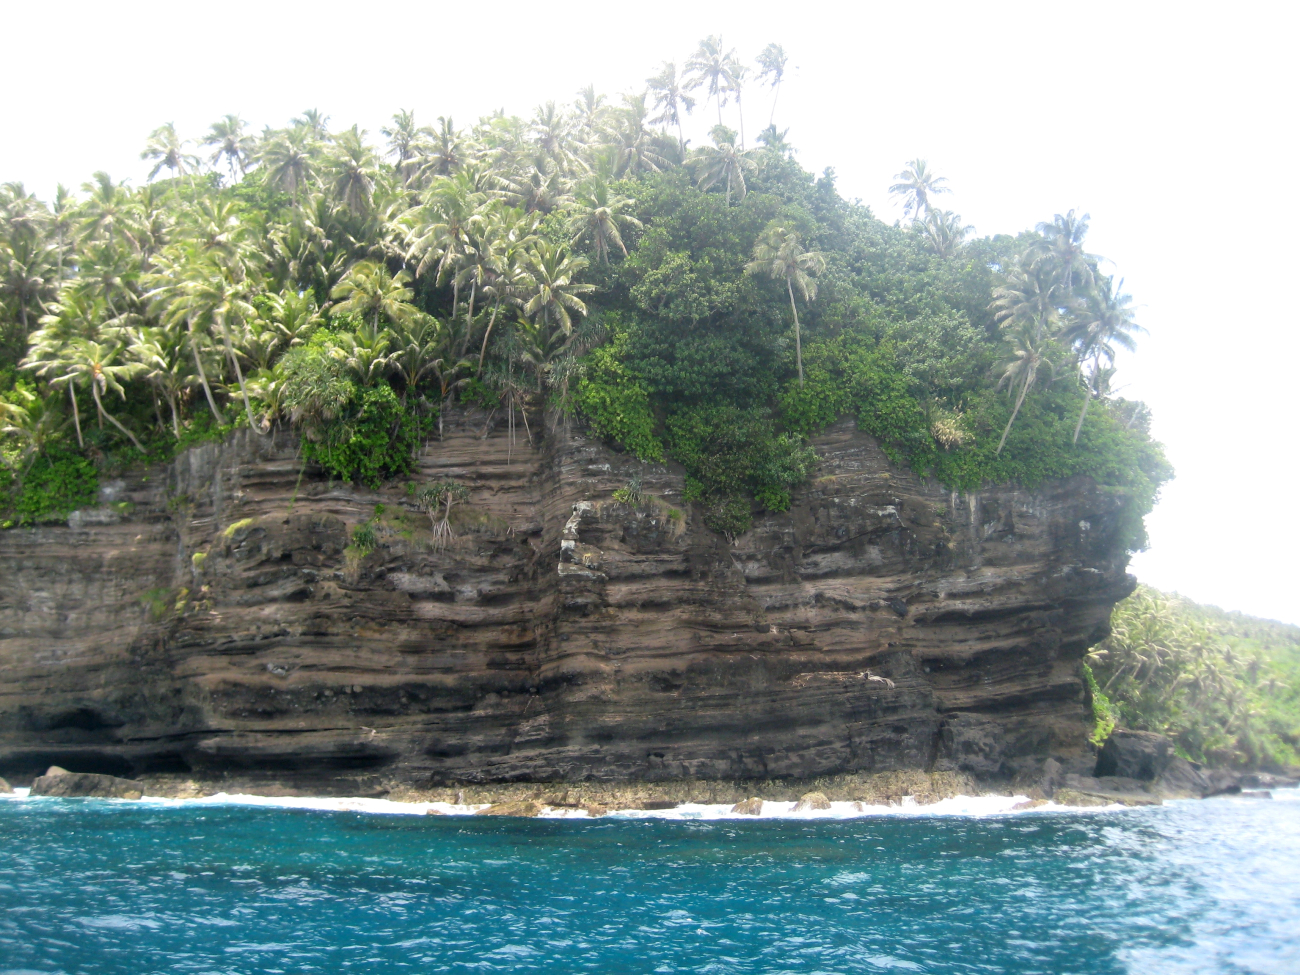 Cliffs and palm trees at Larsen's Bay